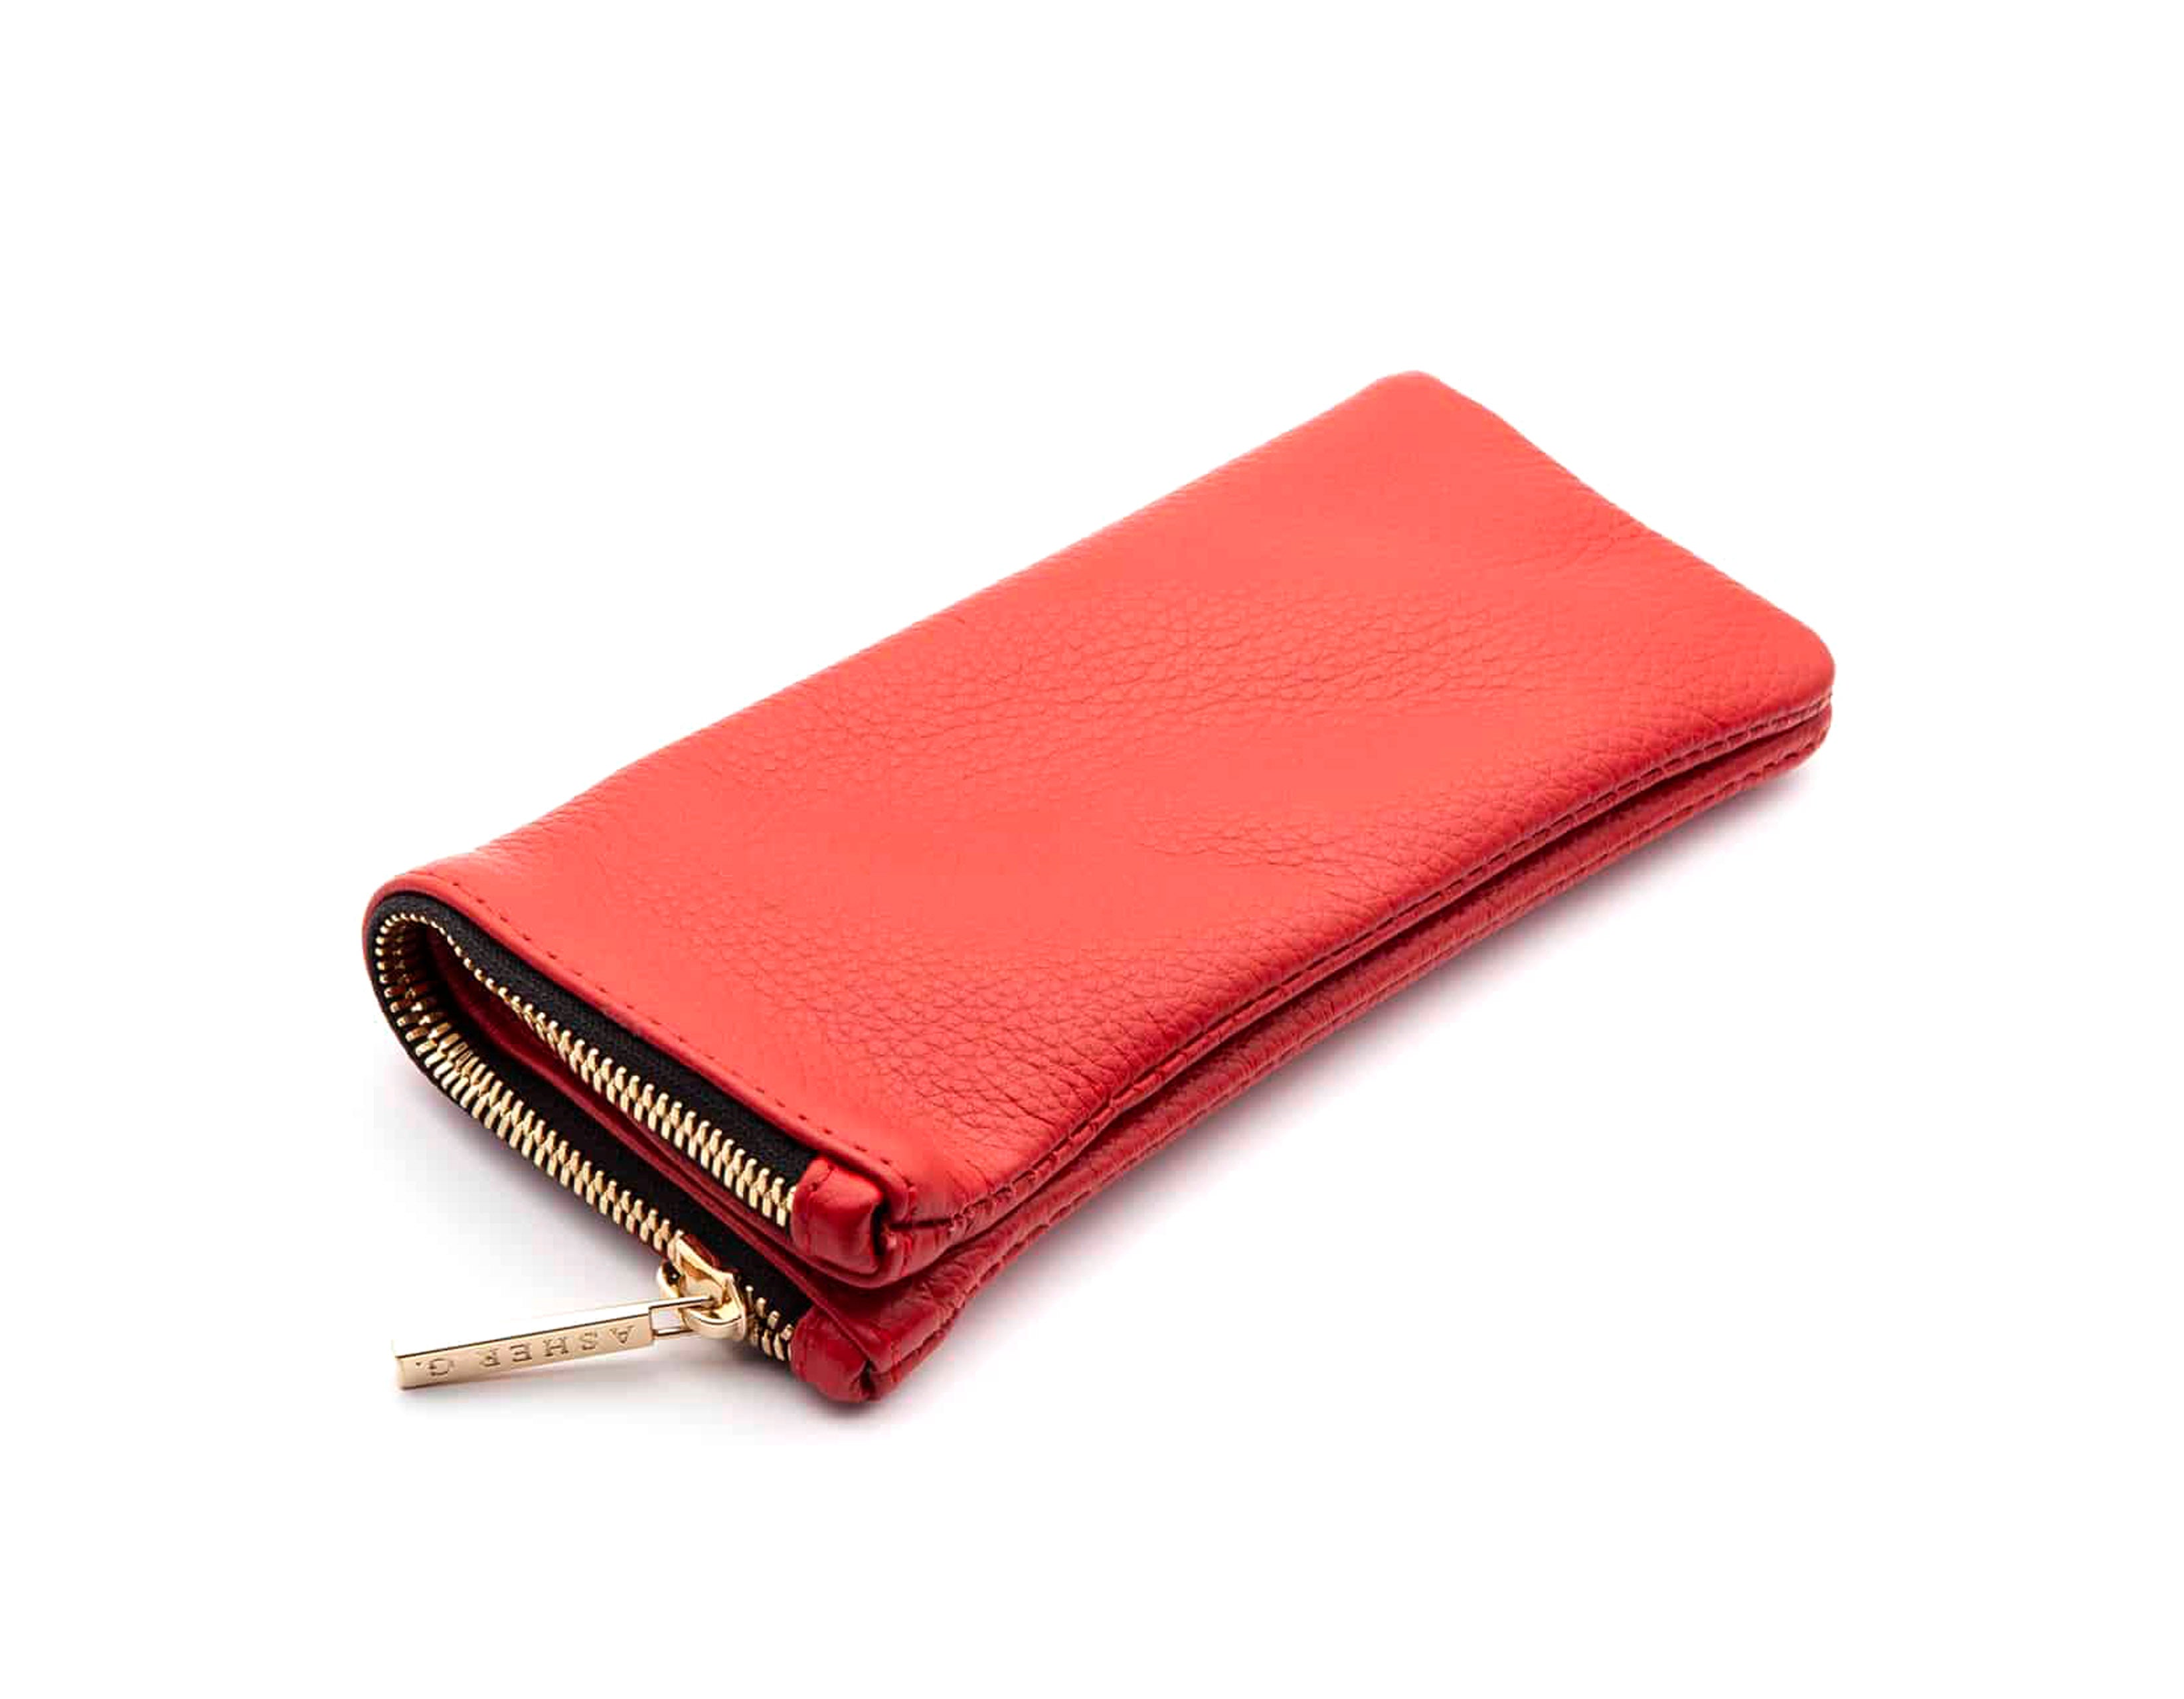 TAVAT x Asher G. Soft Pouch Leather -RED(純手工製皮革眼鏡套)【Pre-order Now】